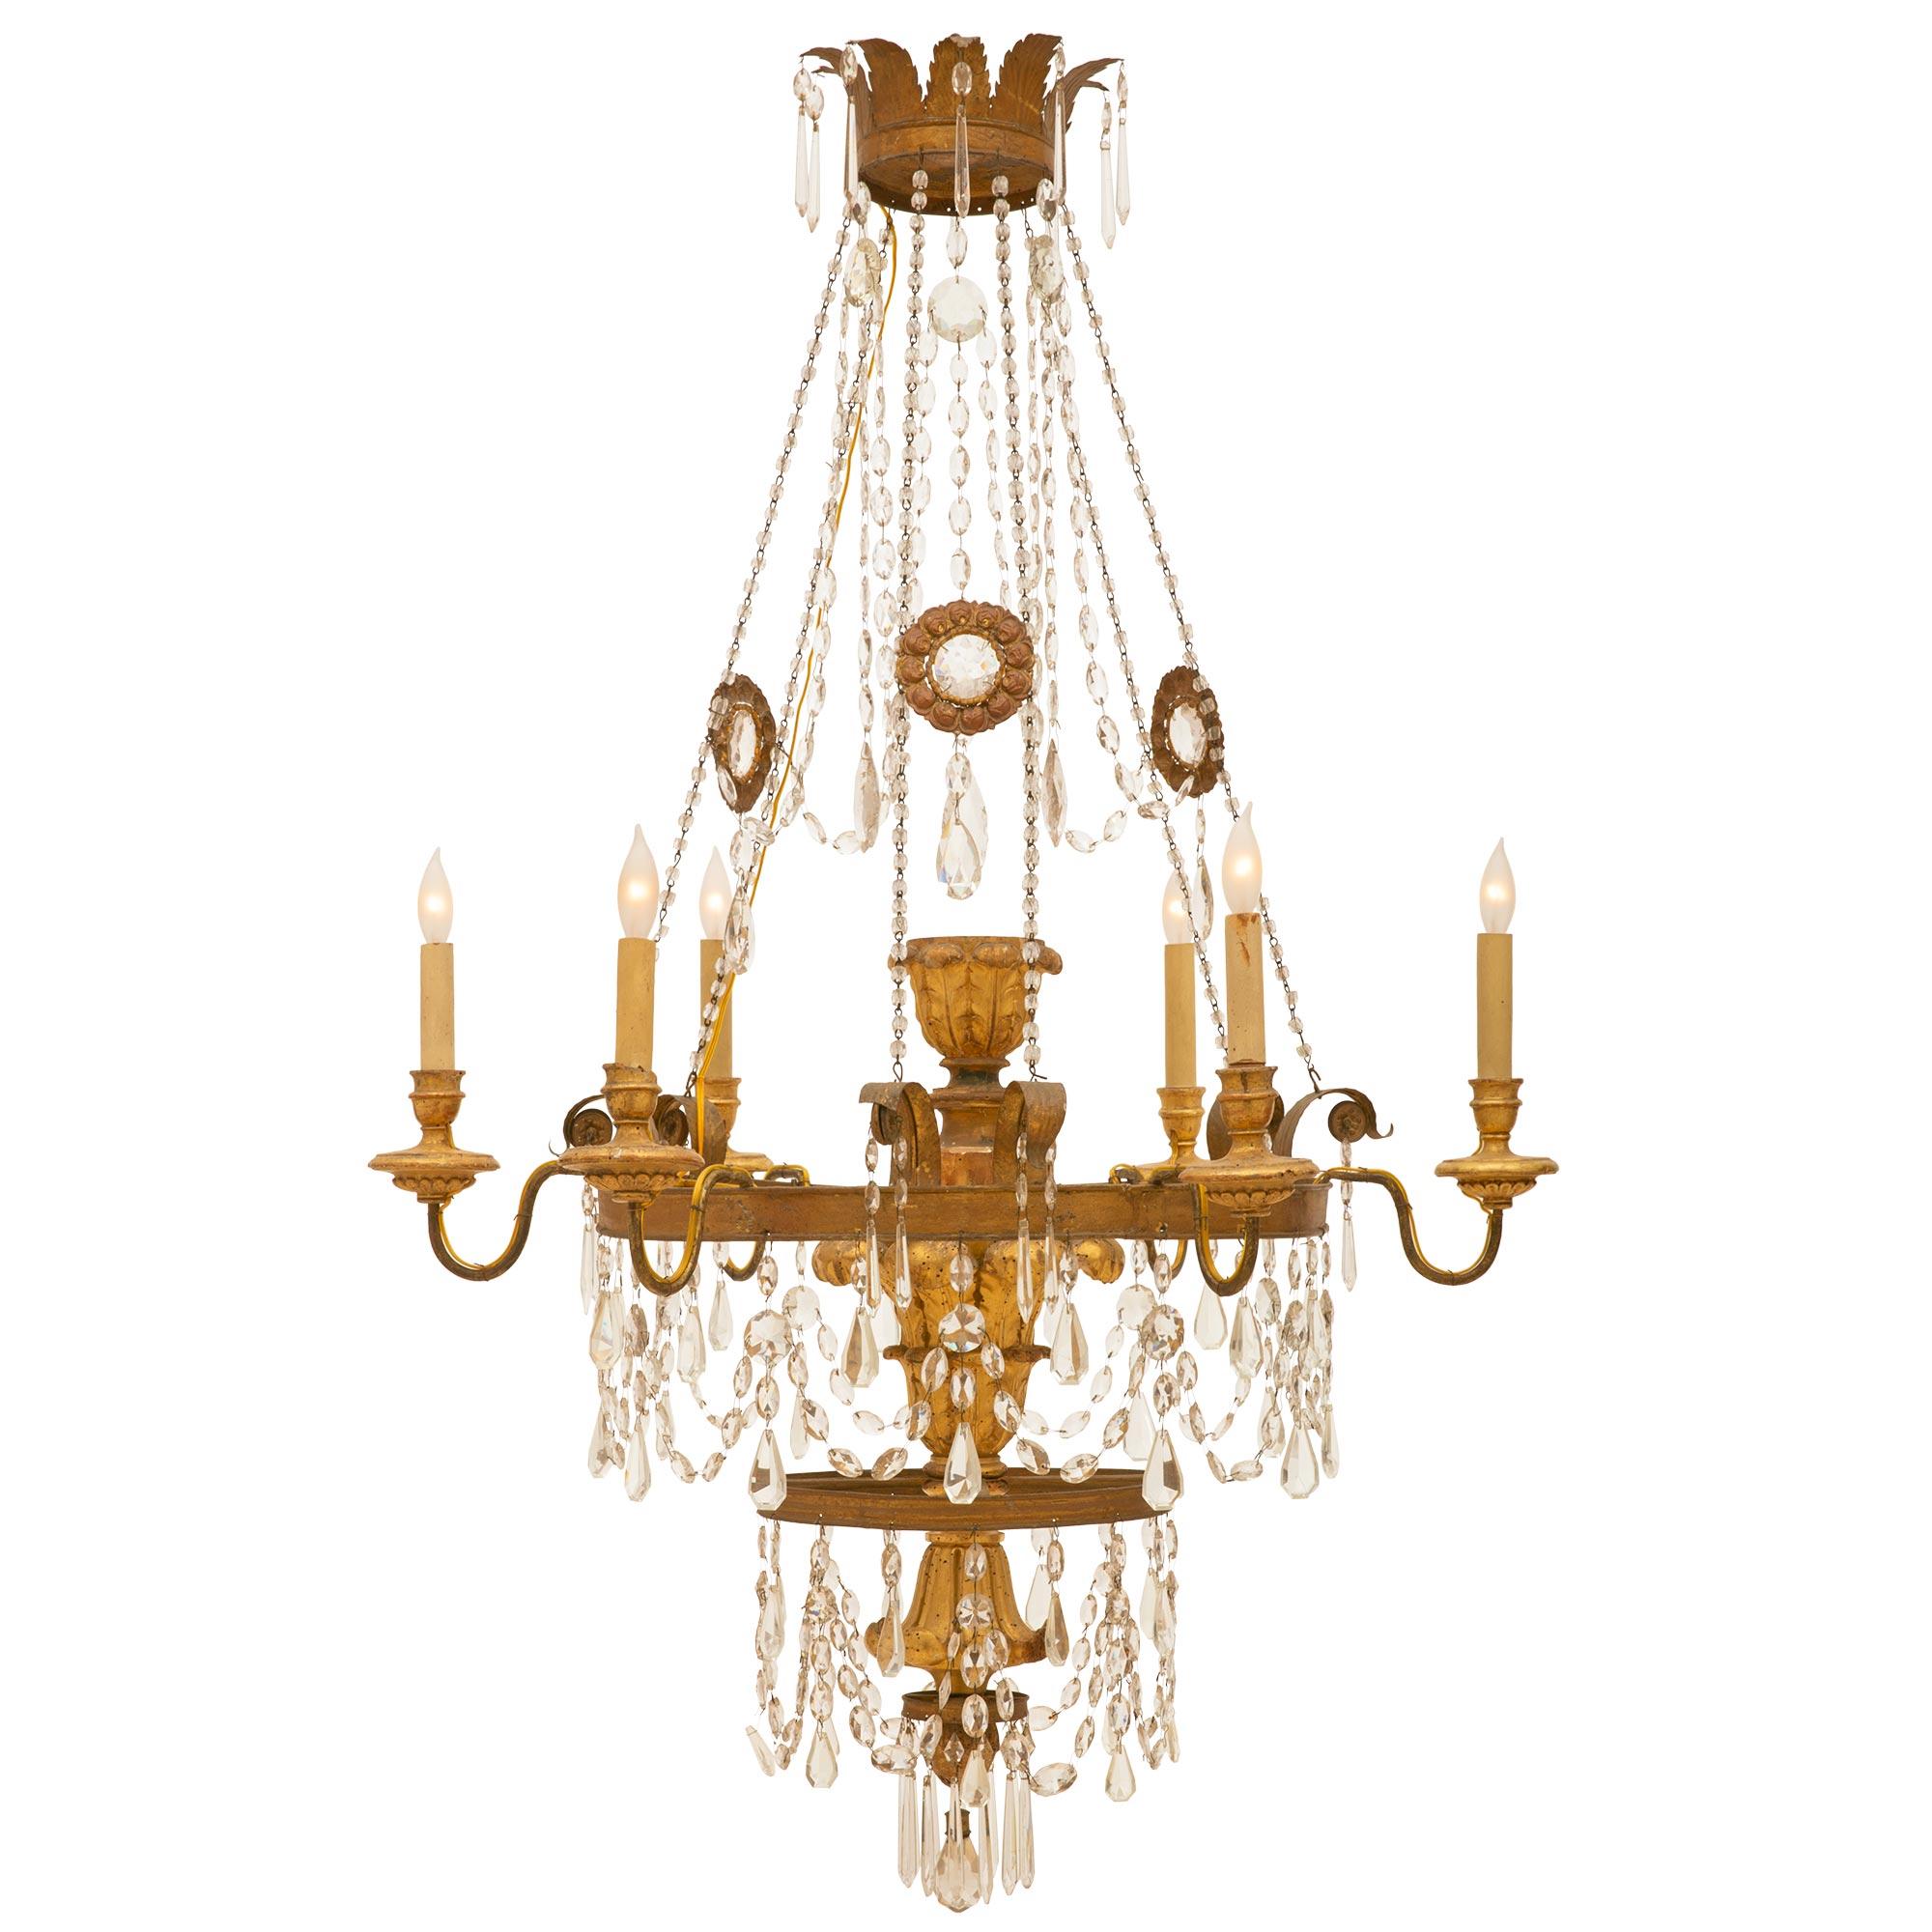 Italian 19th Century Giltwood and Crystal Chandelier